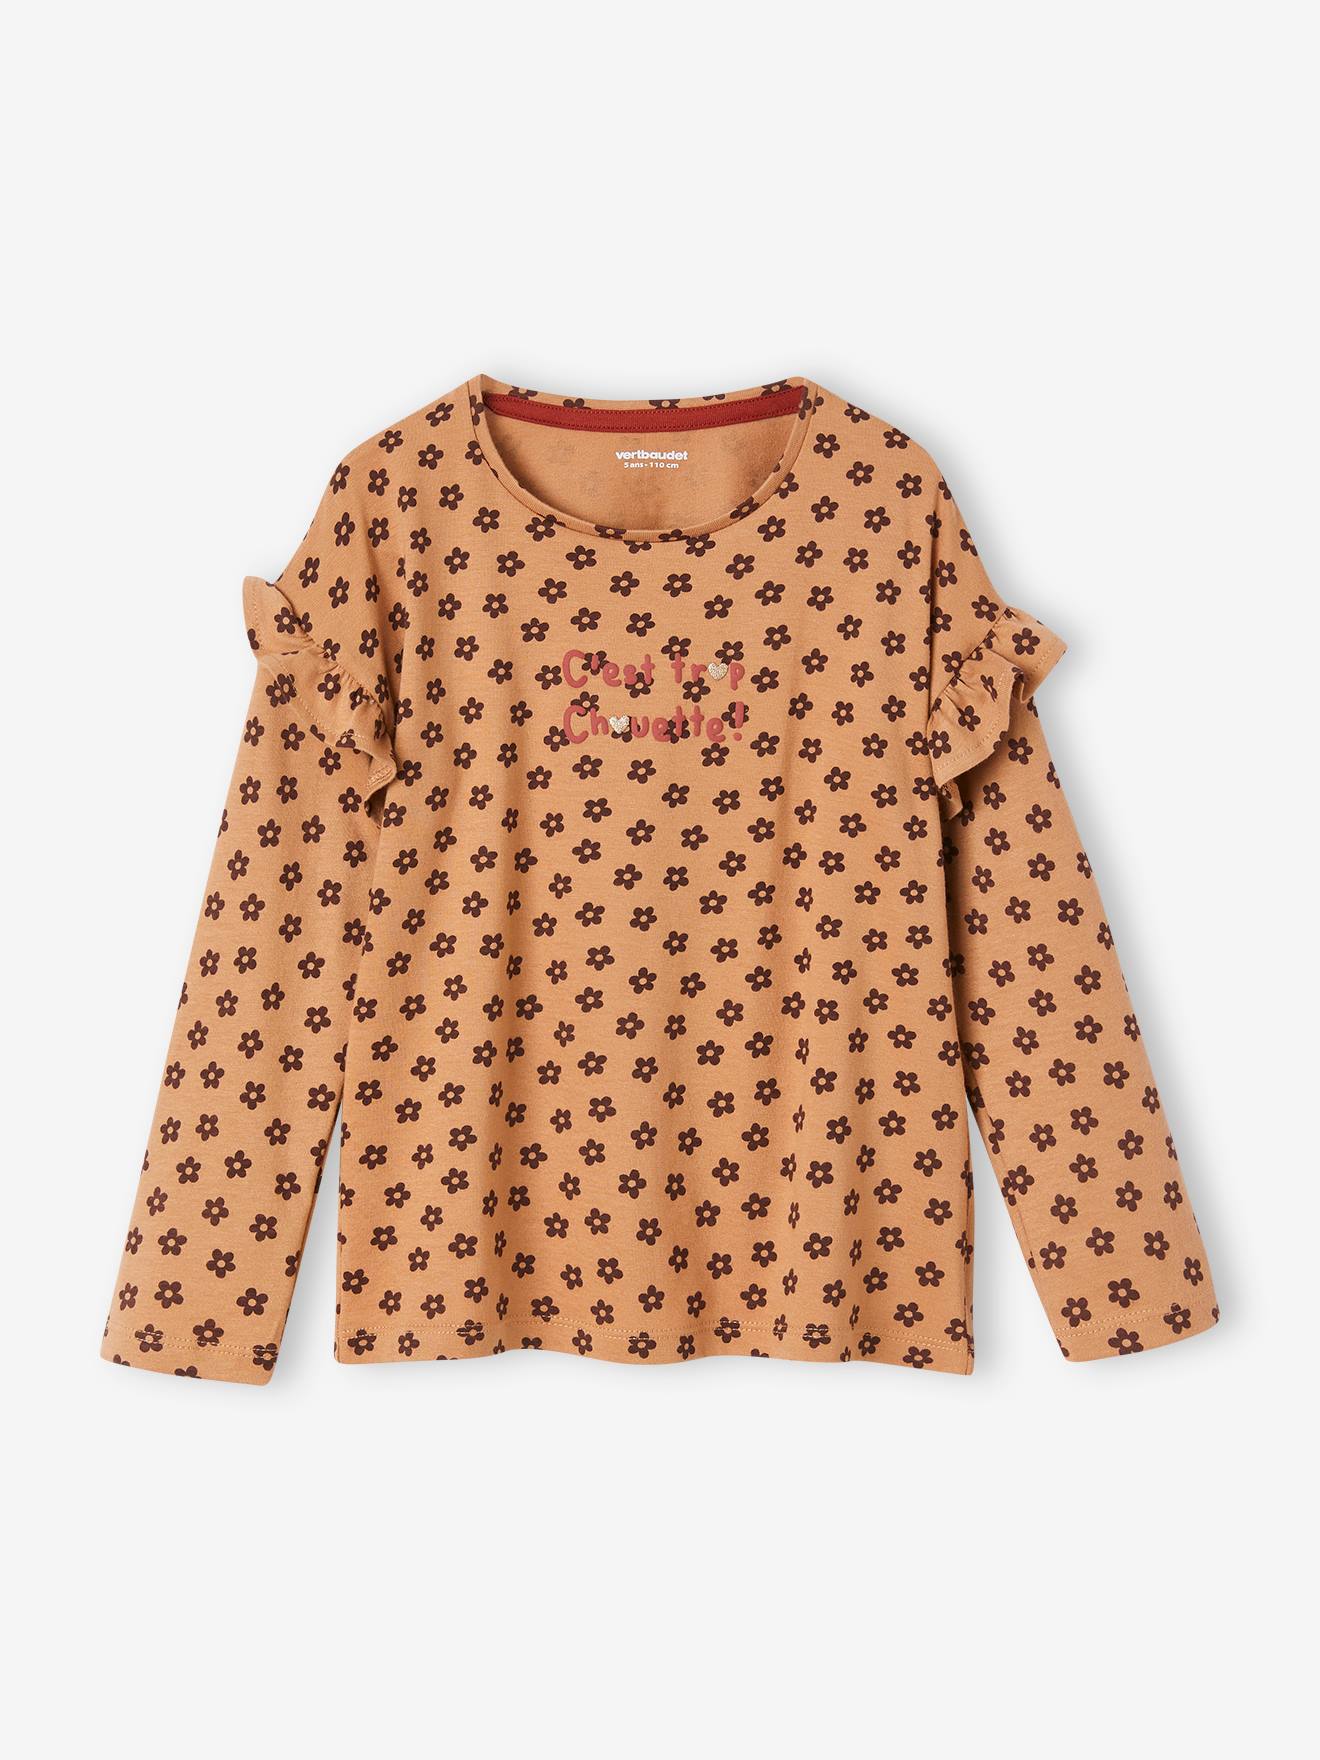 Top with Message, Ruffled Sleeves, for Girls hazel